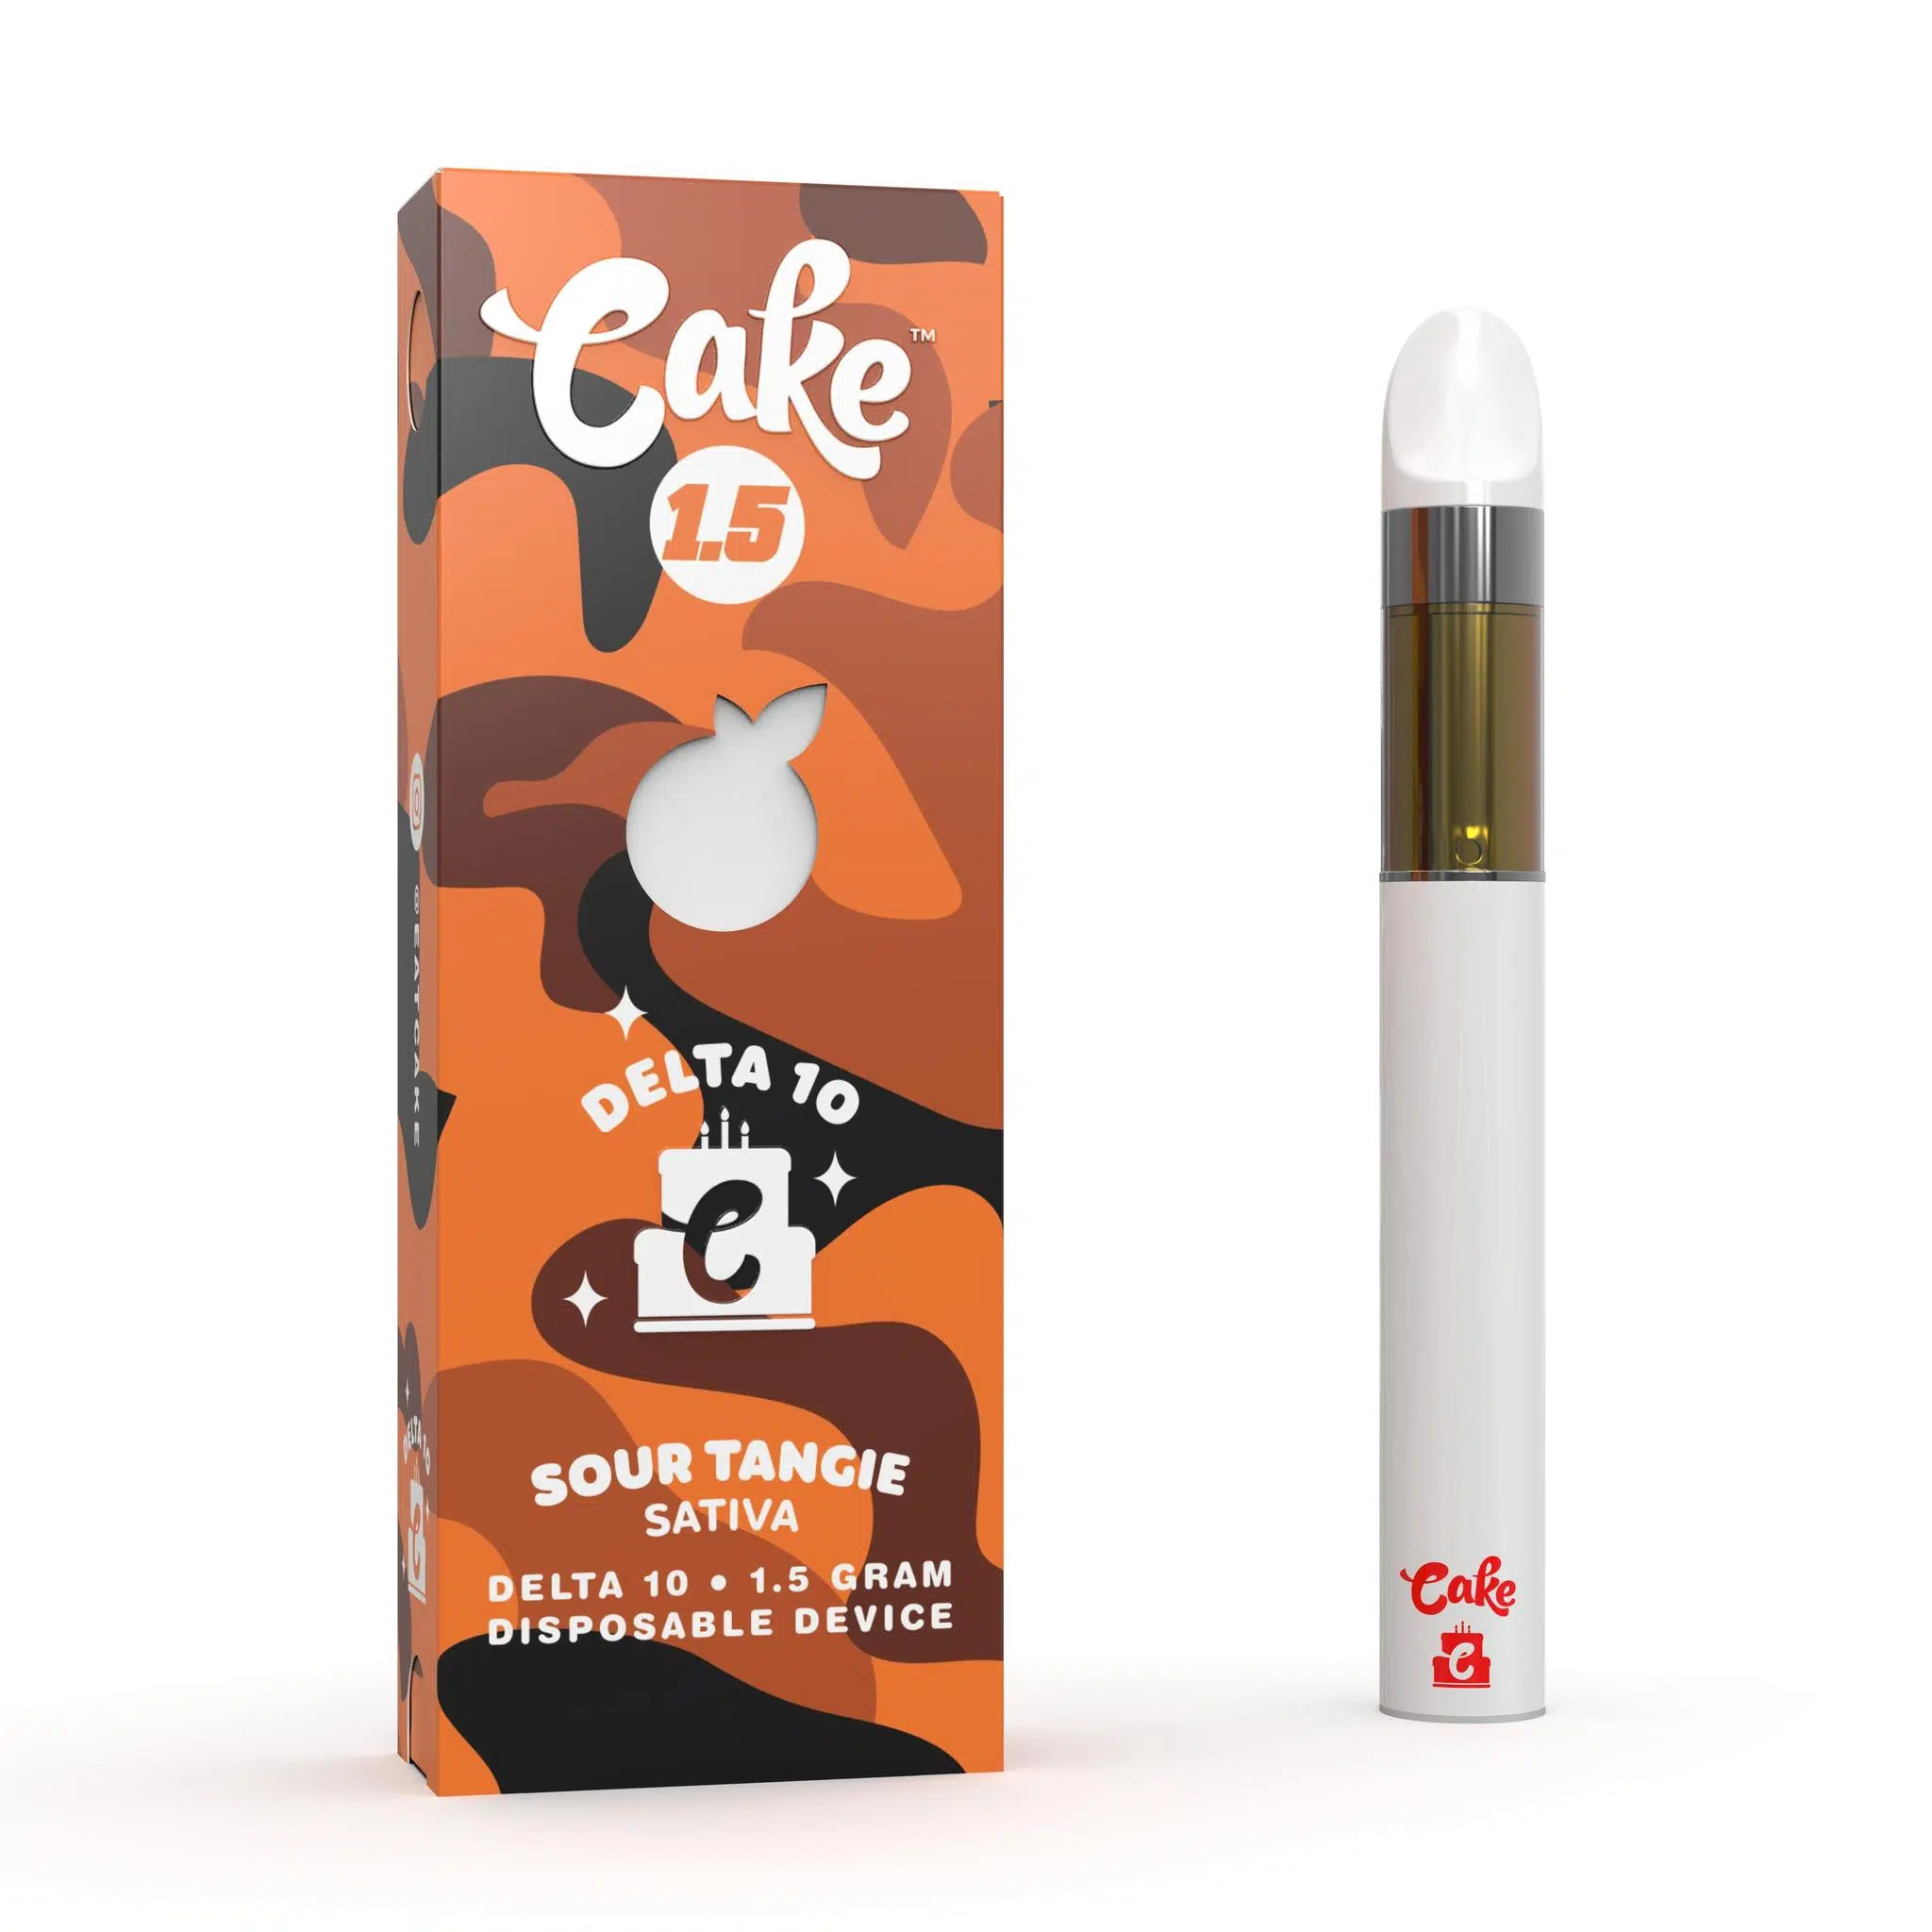 What Is the Cake Sour Tangie Delta 8?